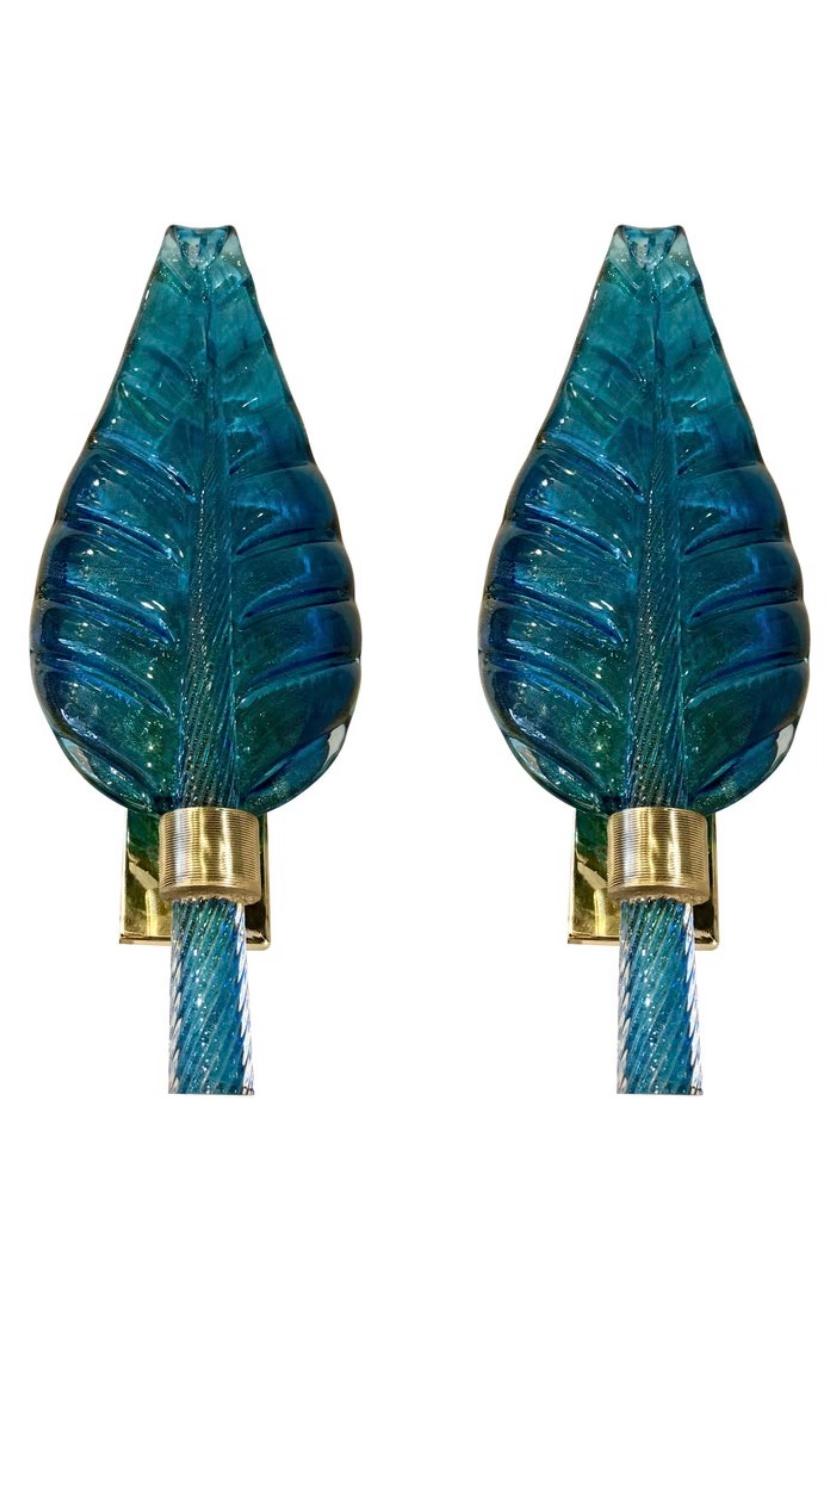 Pair of Murano Glass Leaf-Form Wall Lights by Barovier & Toso, circa 1960 For Sale 1